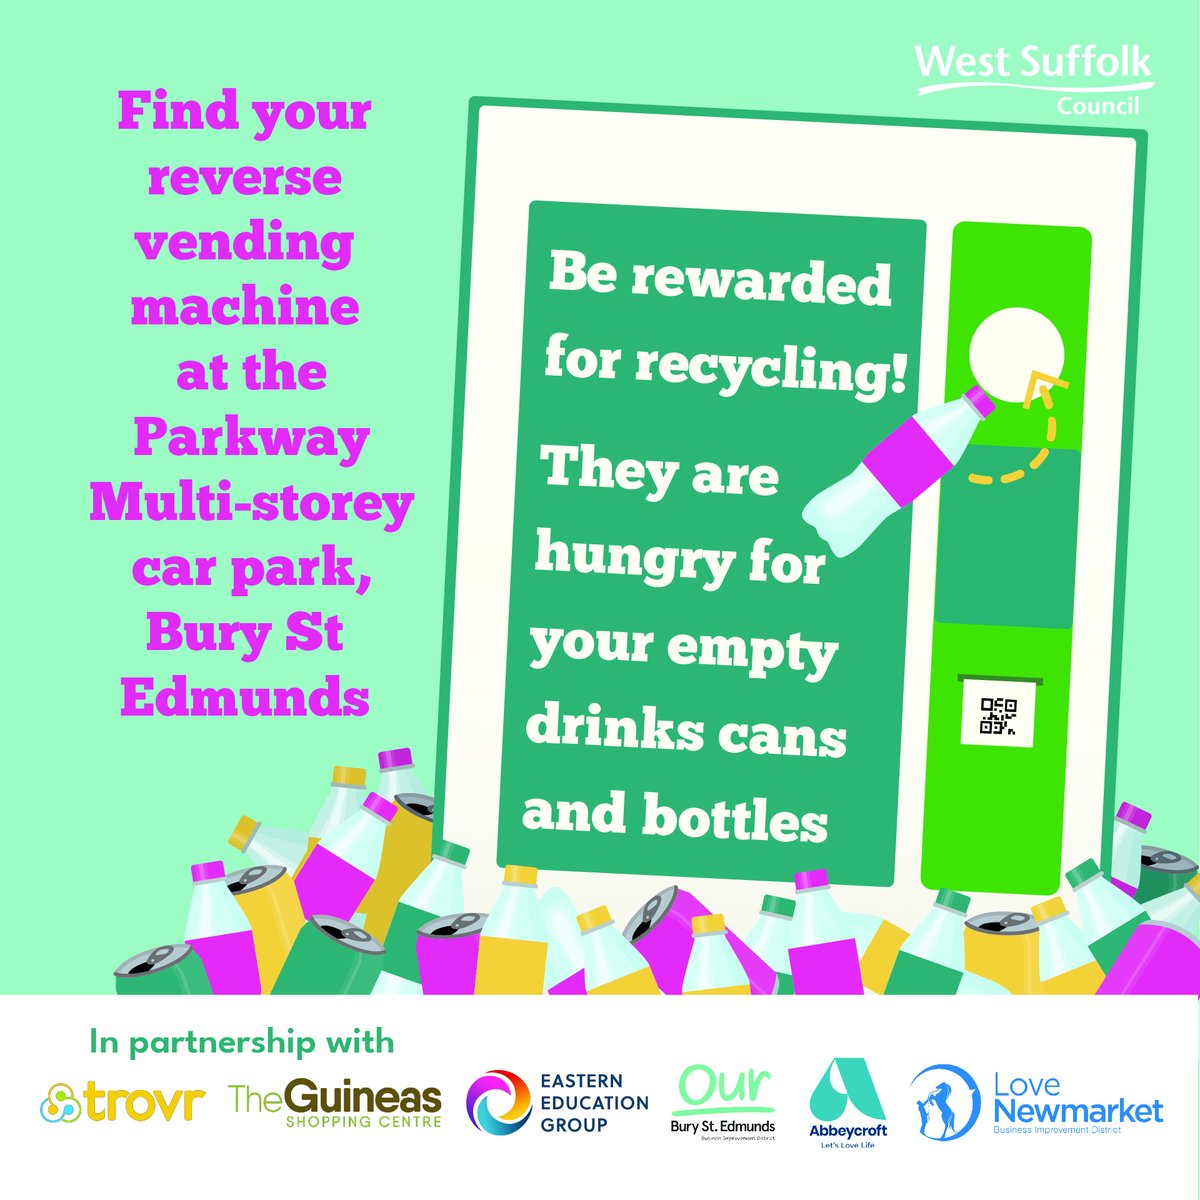 If you're out & about this weekend and keeping hydrated from drinks in single use plastic bottles or cans, try out one of the reverse vending machines in Bury St Edmunds or Newmarket to dispose of your beverage containers responsibly and earn rewards at the same time! @trovrapp